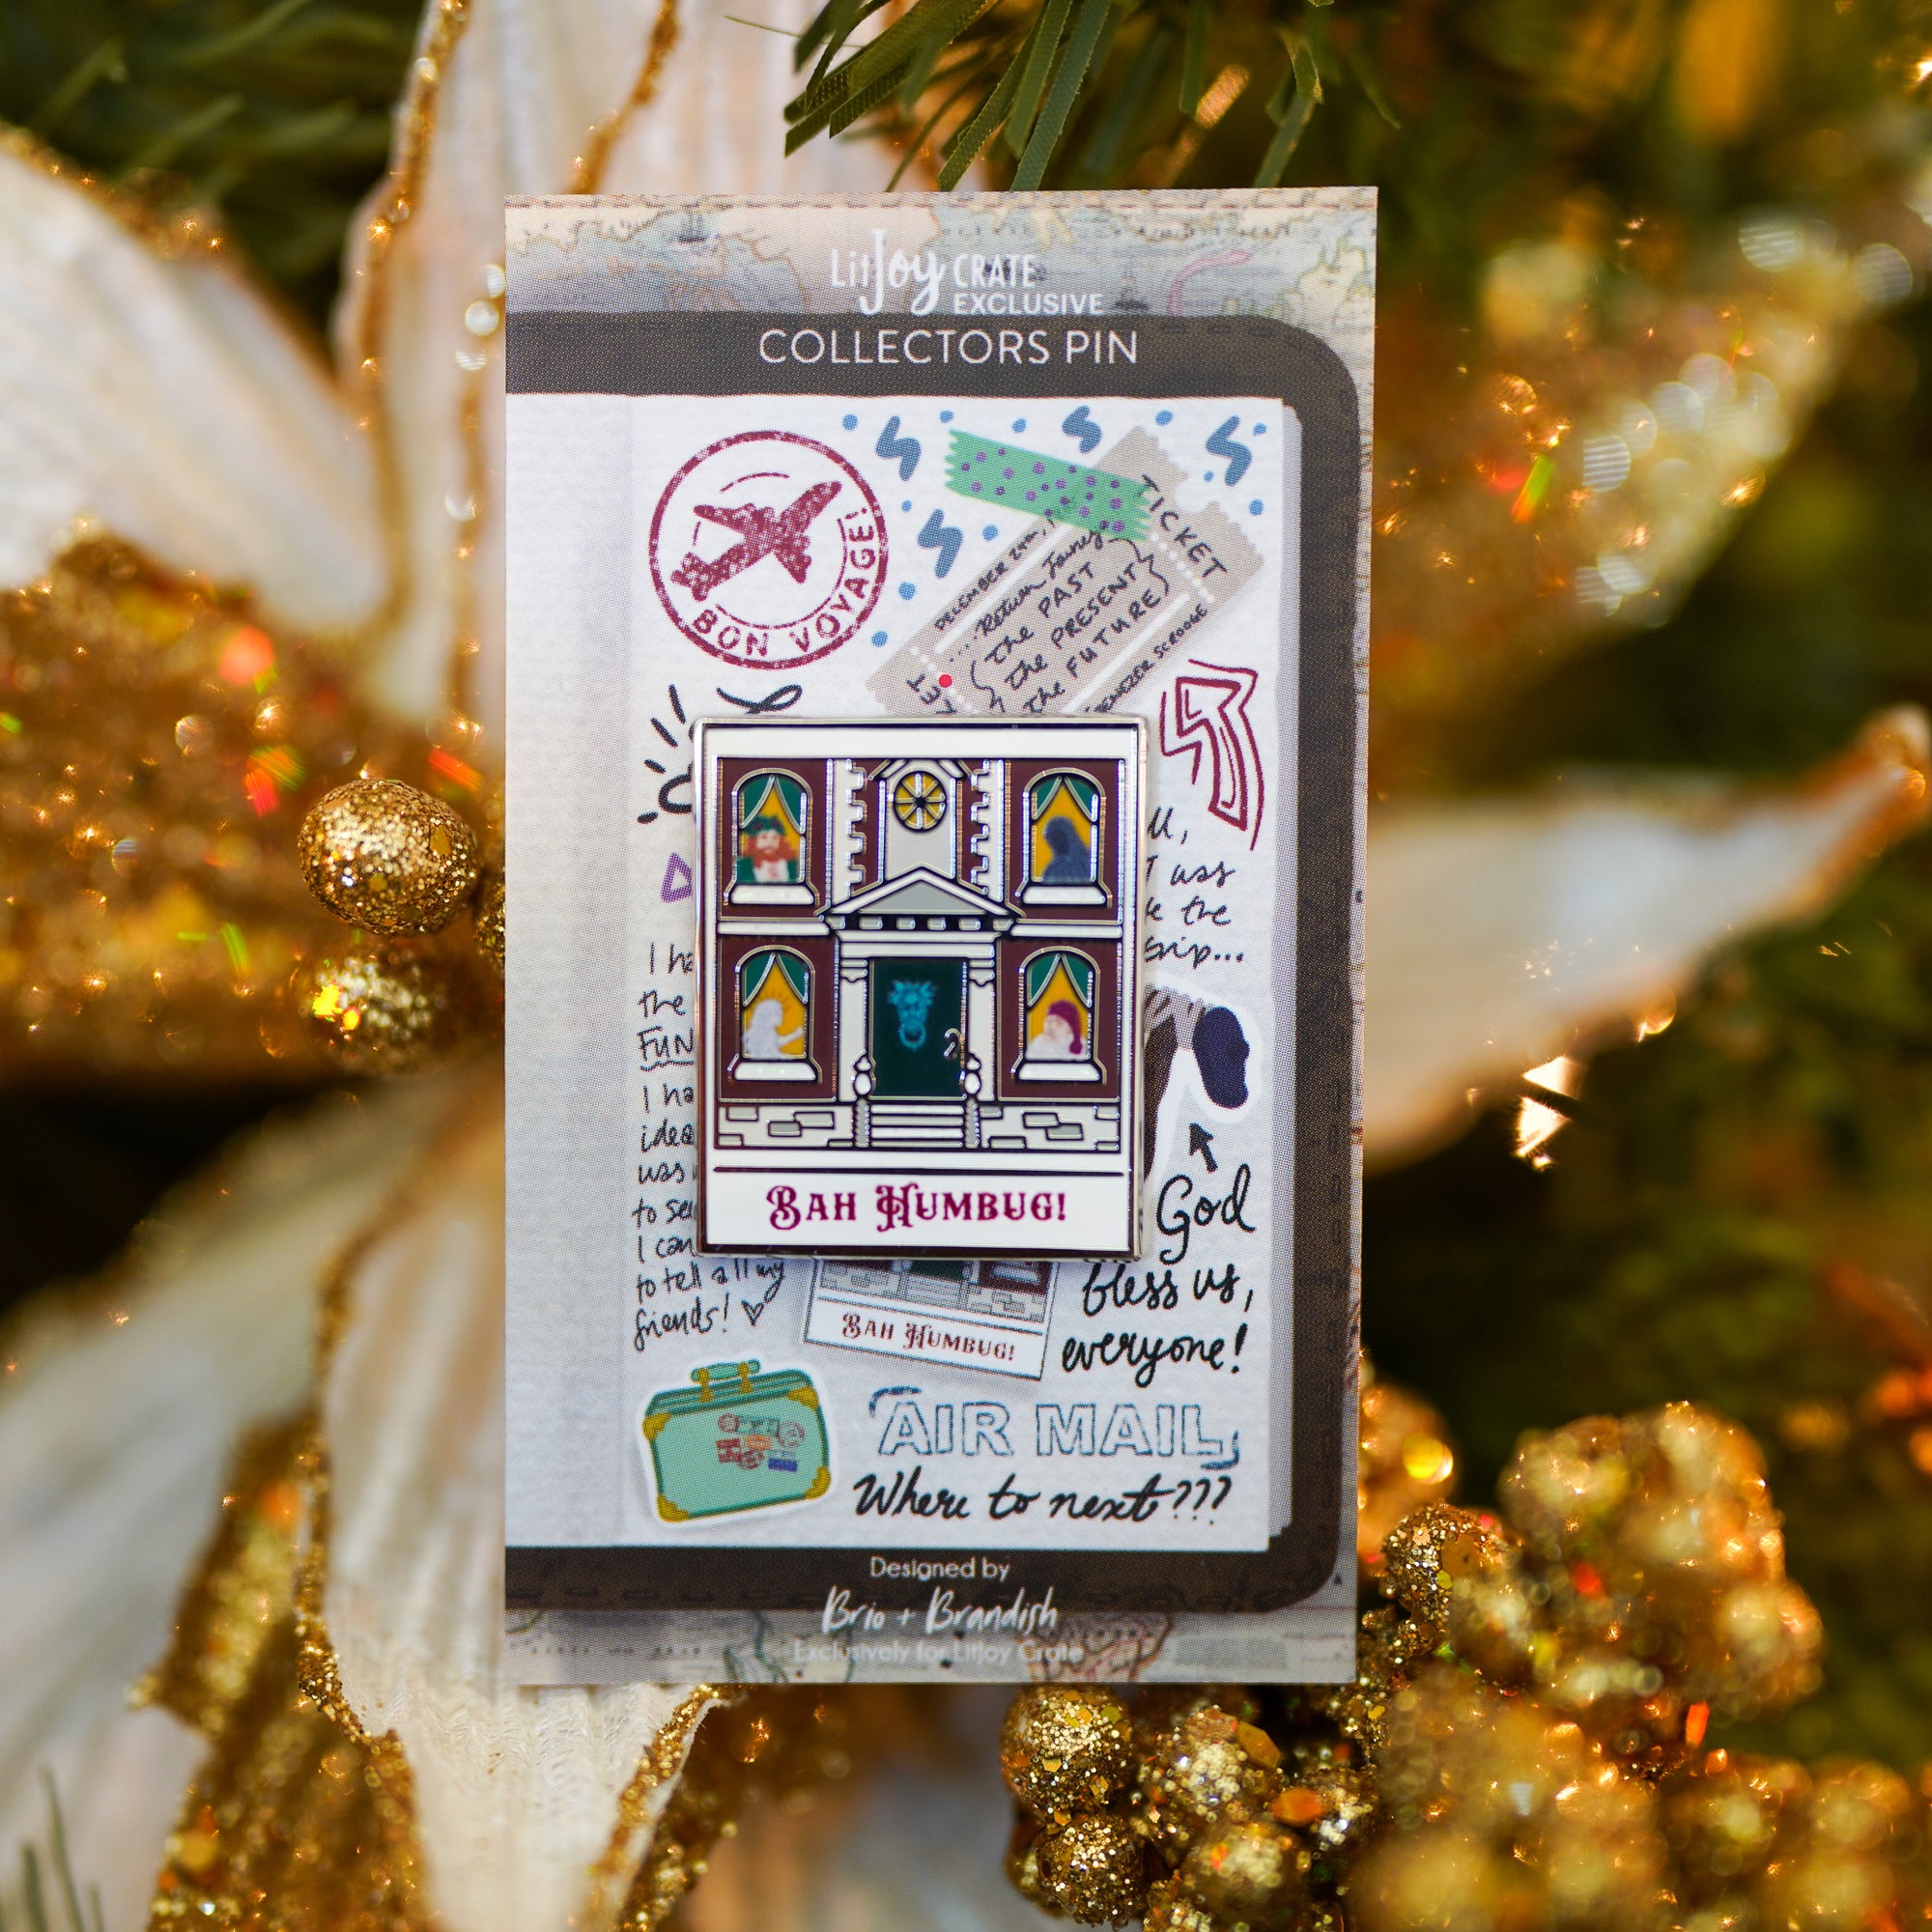 A Christmas Carol Polaroid Enamel Pin featuring the ghosts of Christmas Past, Present, Future, and Scrooge's business partner Marley in the windows.  